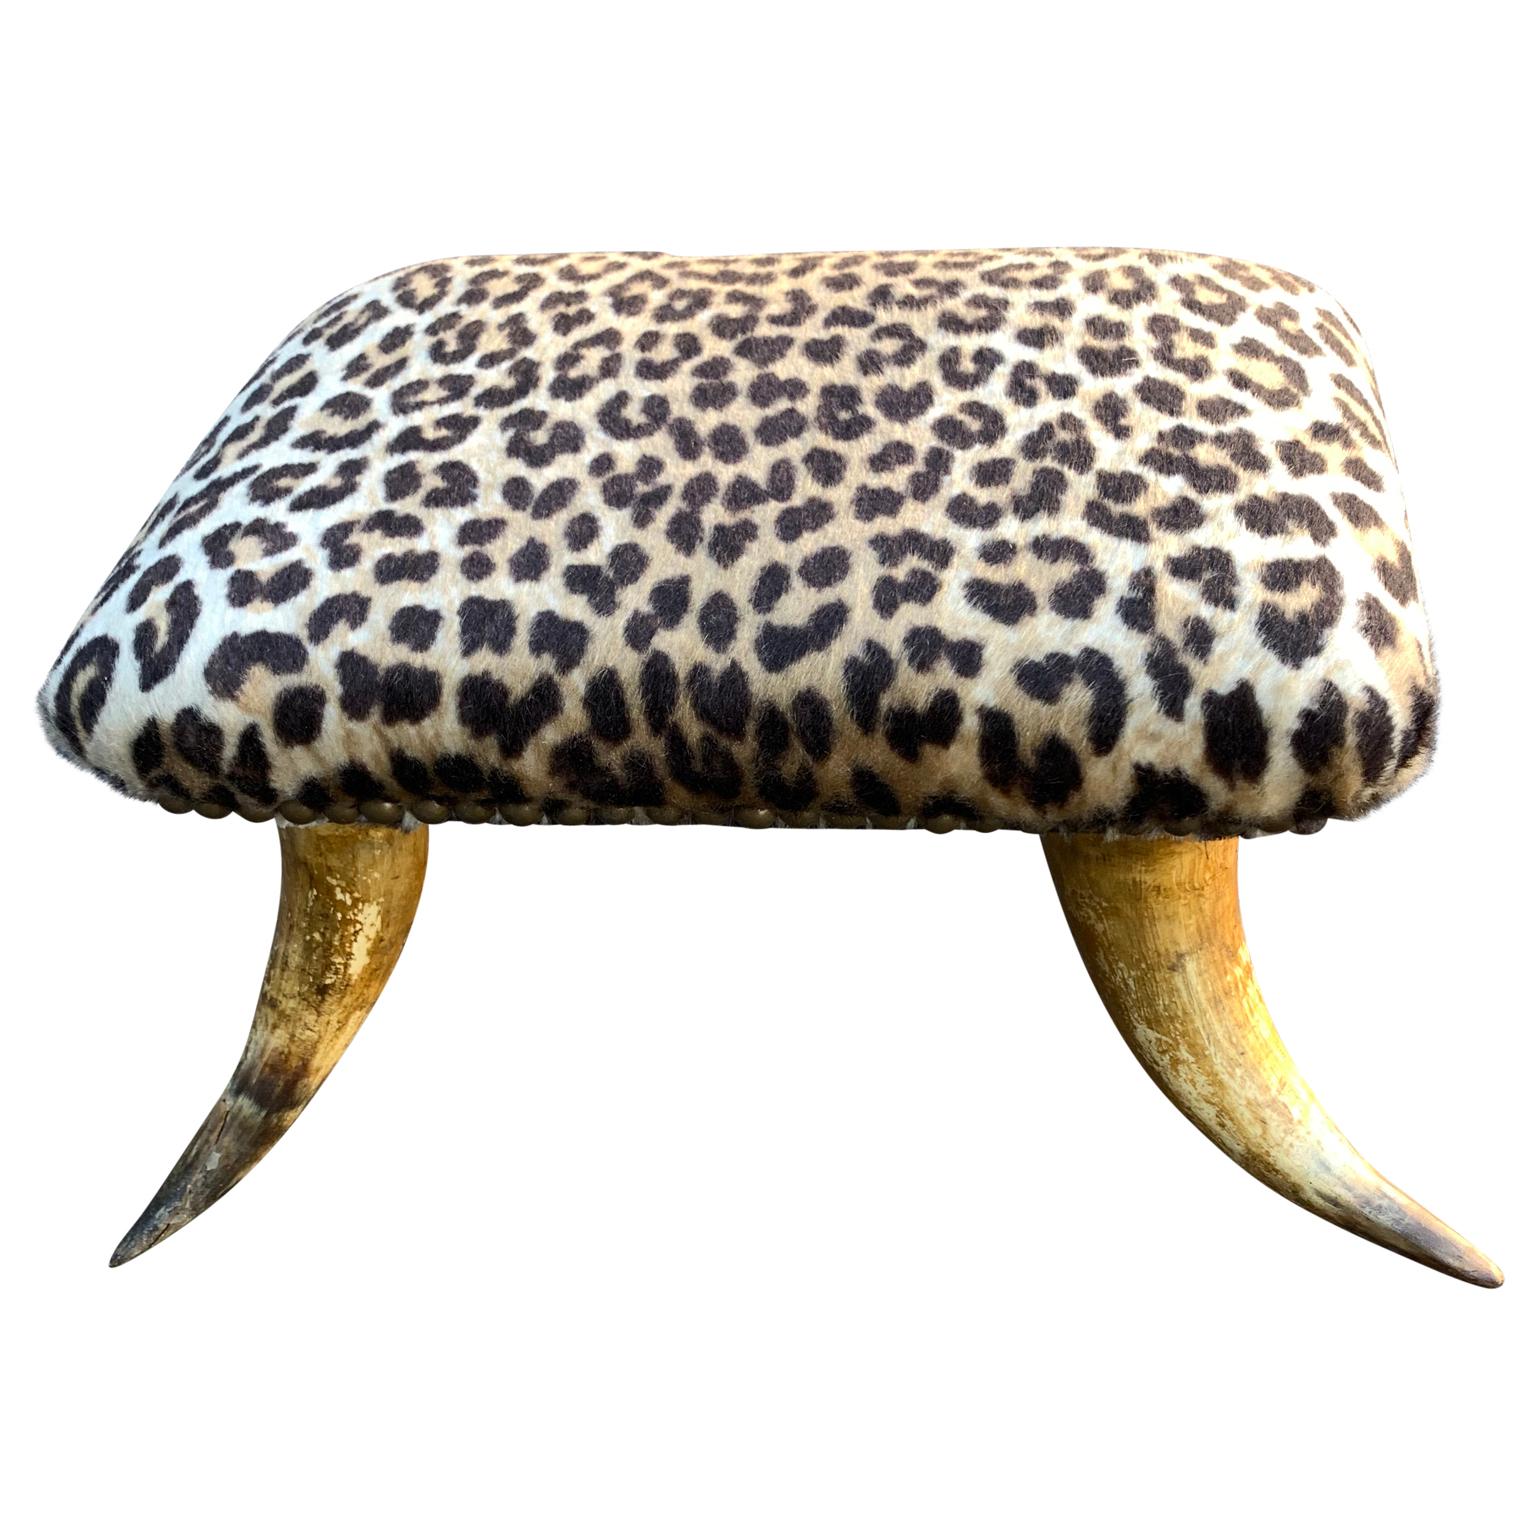 Small antique faux cheetah hide upholstered horn footstool.